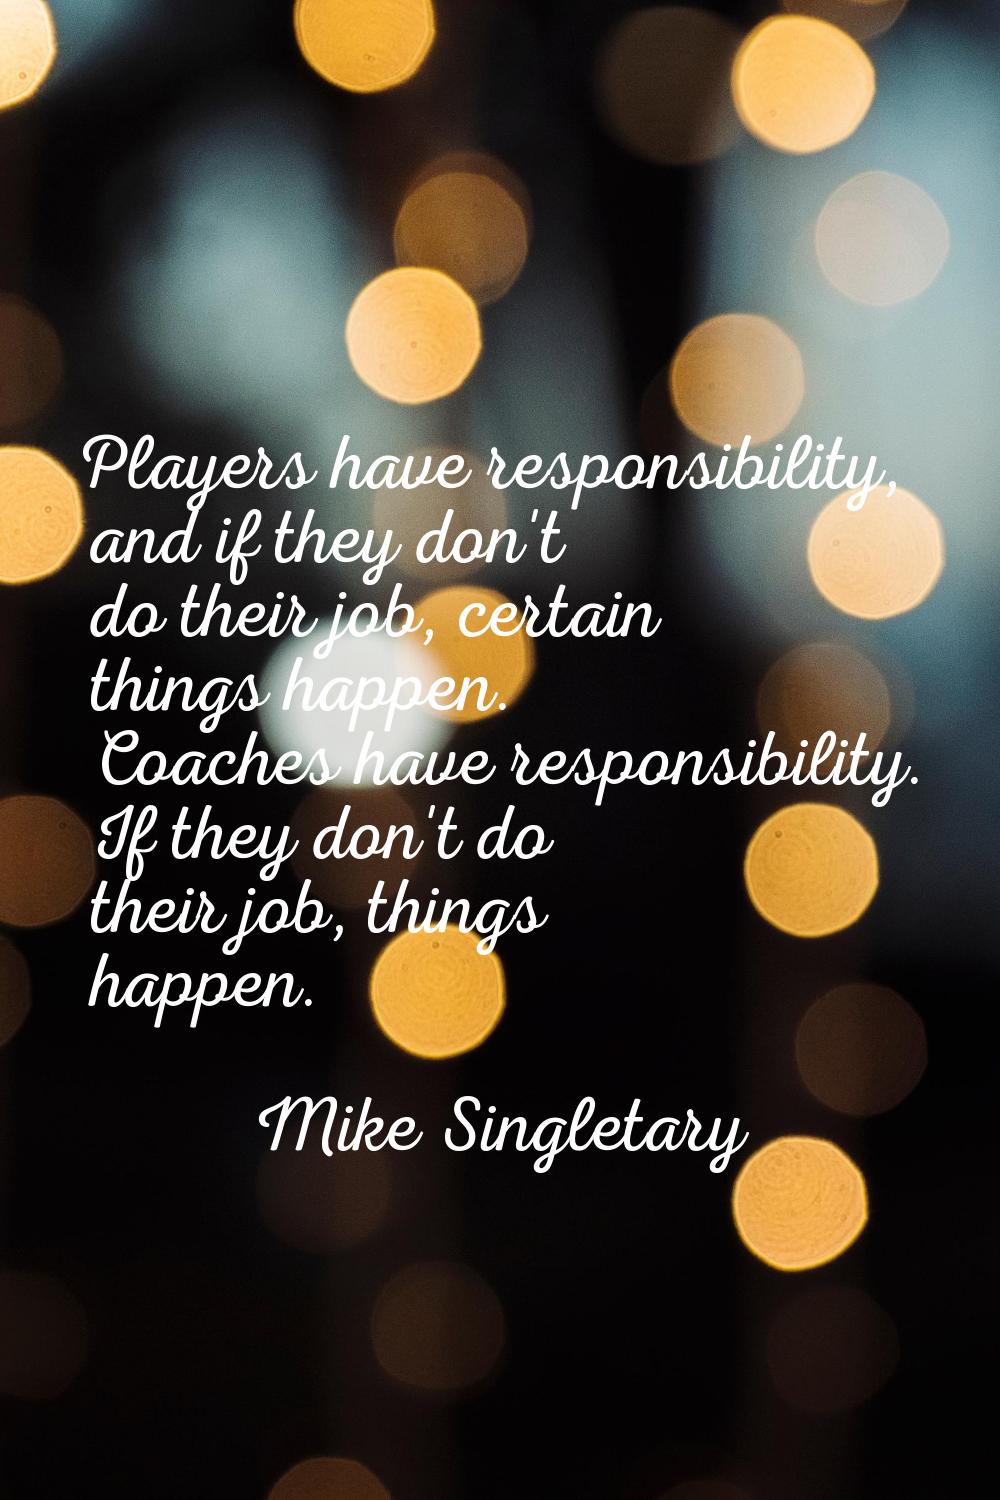 Players have responsibility, and if they don't do their job, certain things happen. Coaches have re